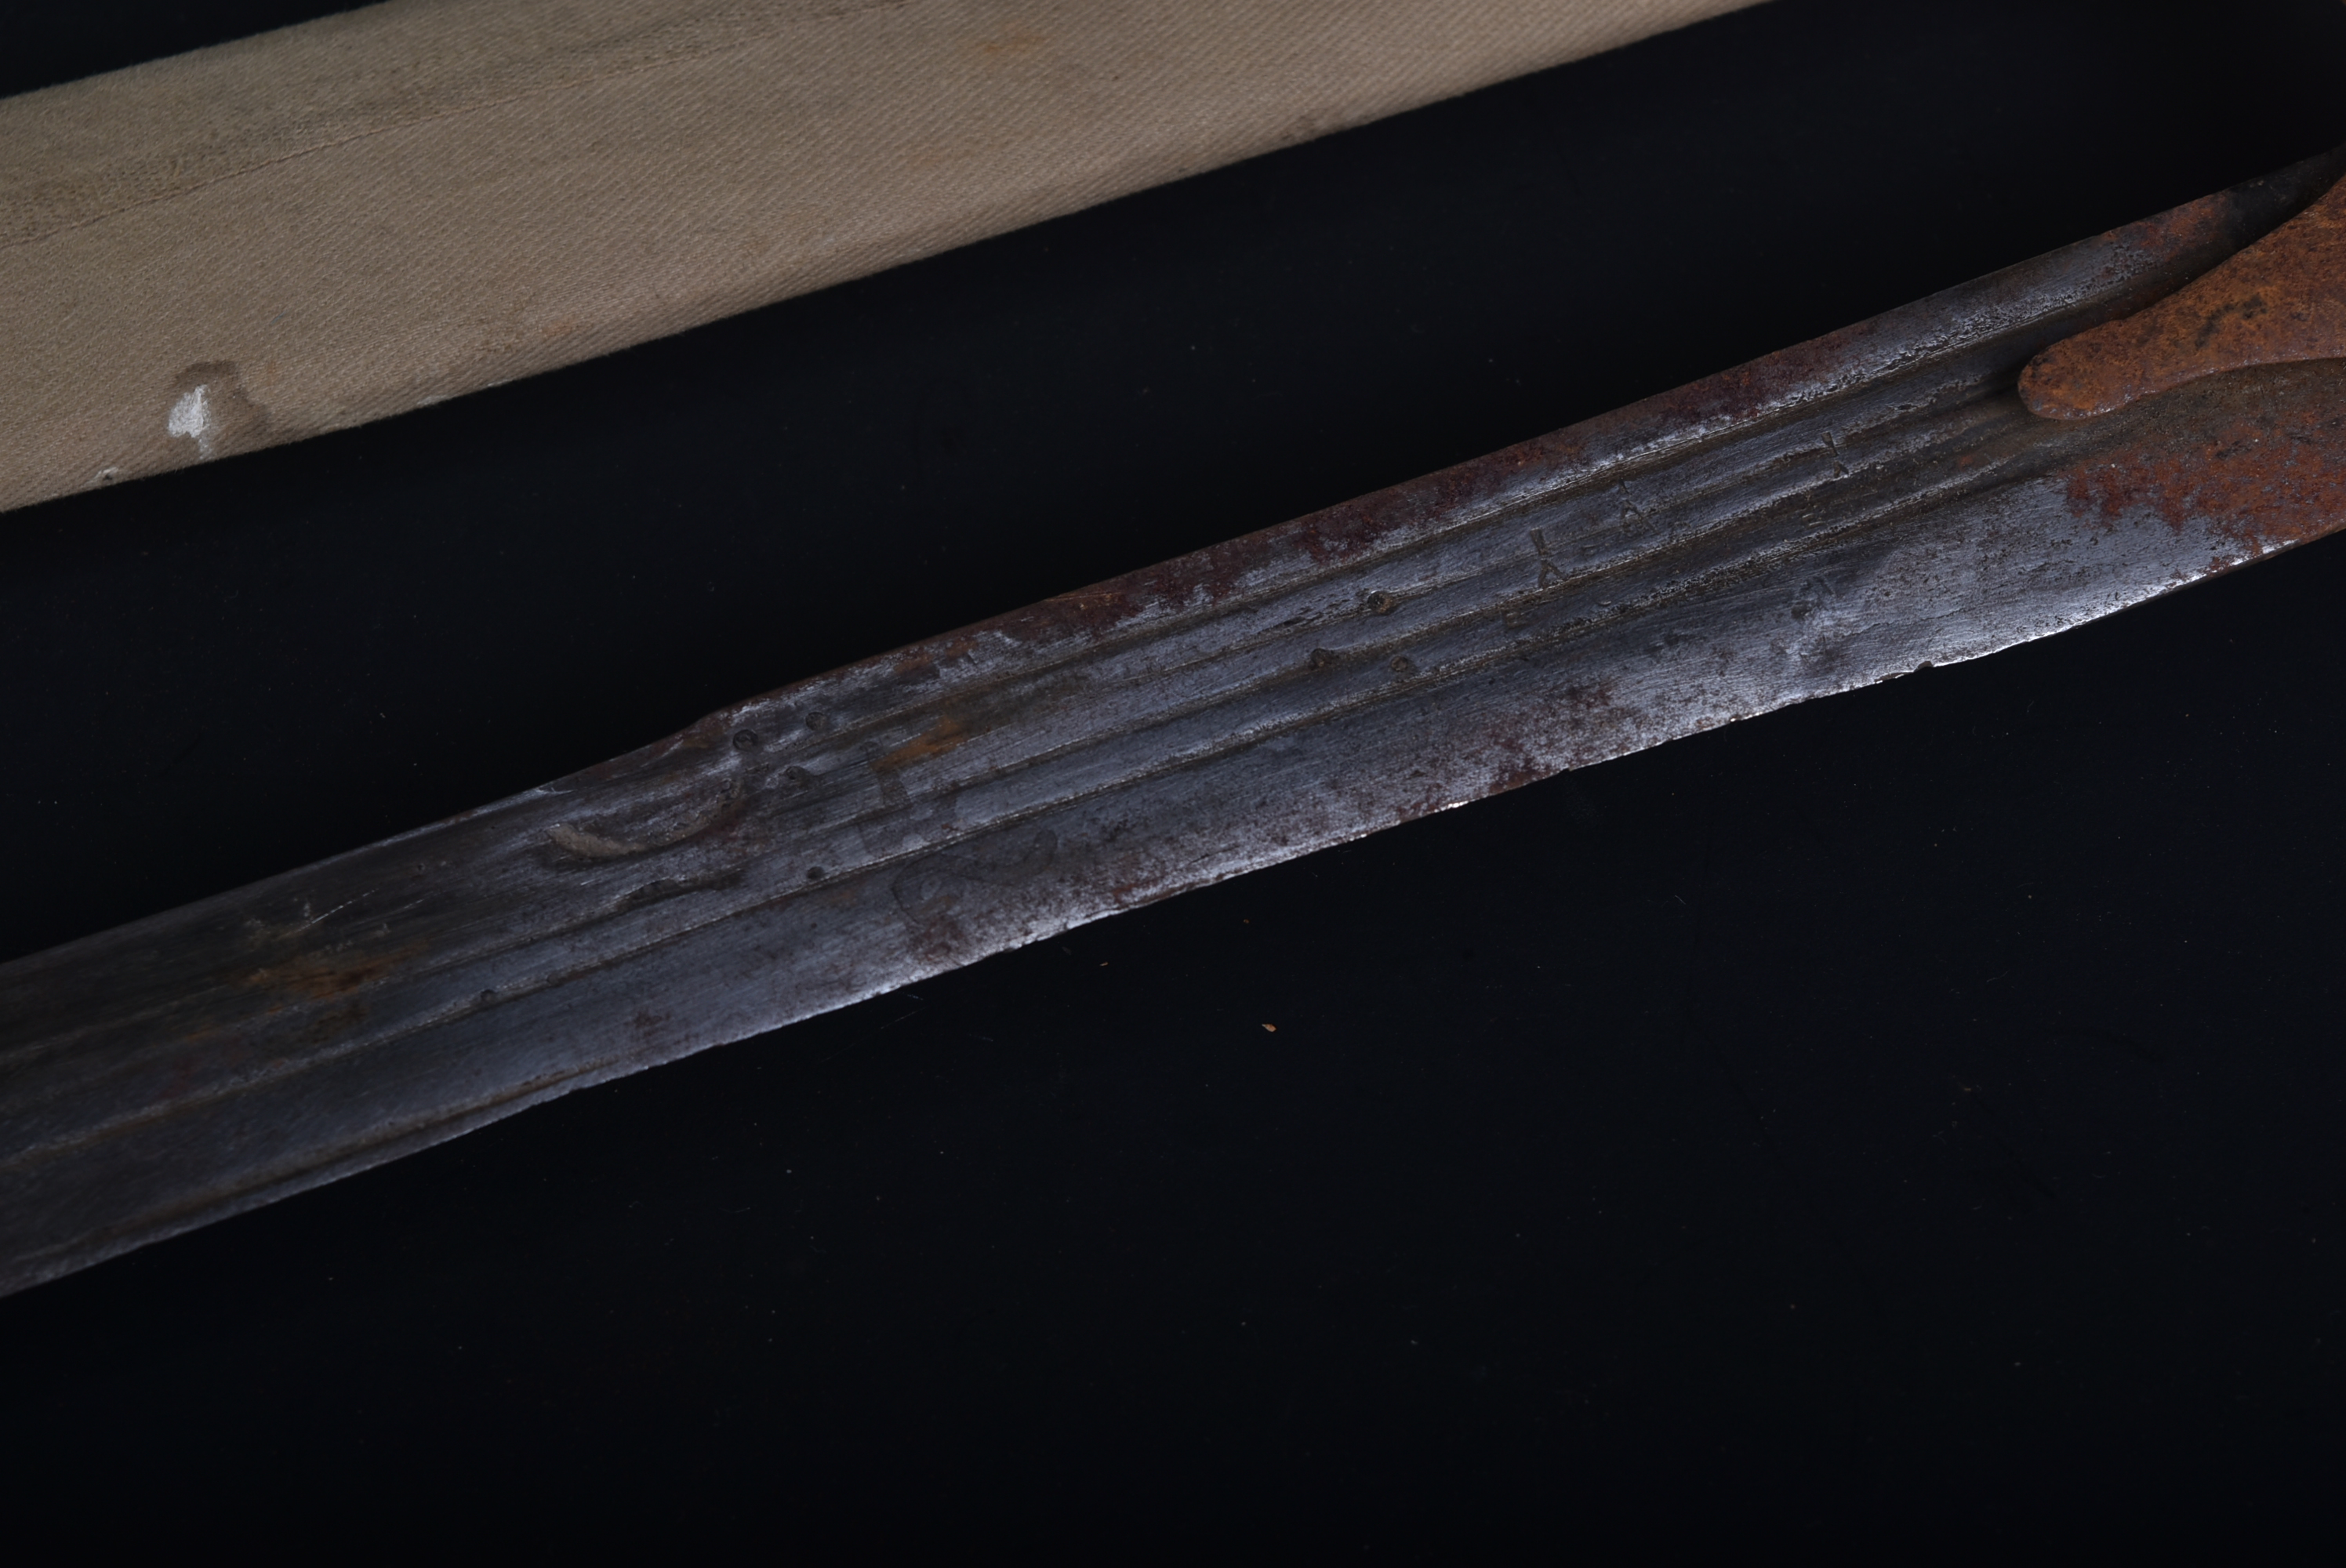 EARLY 19TH CENTURY NORTH INDIAN TULWAR SWORD - Image 3 of 8